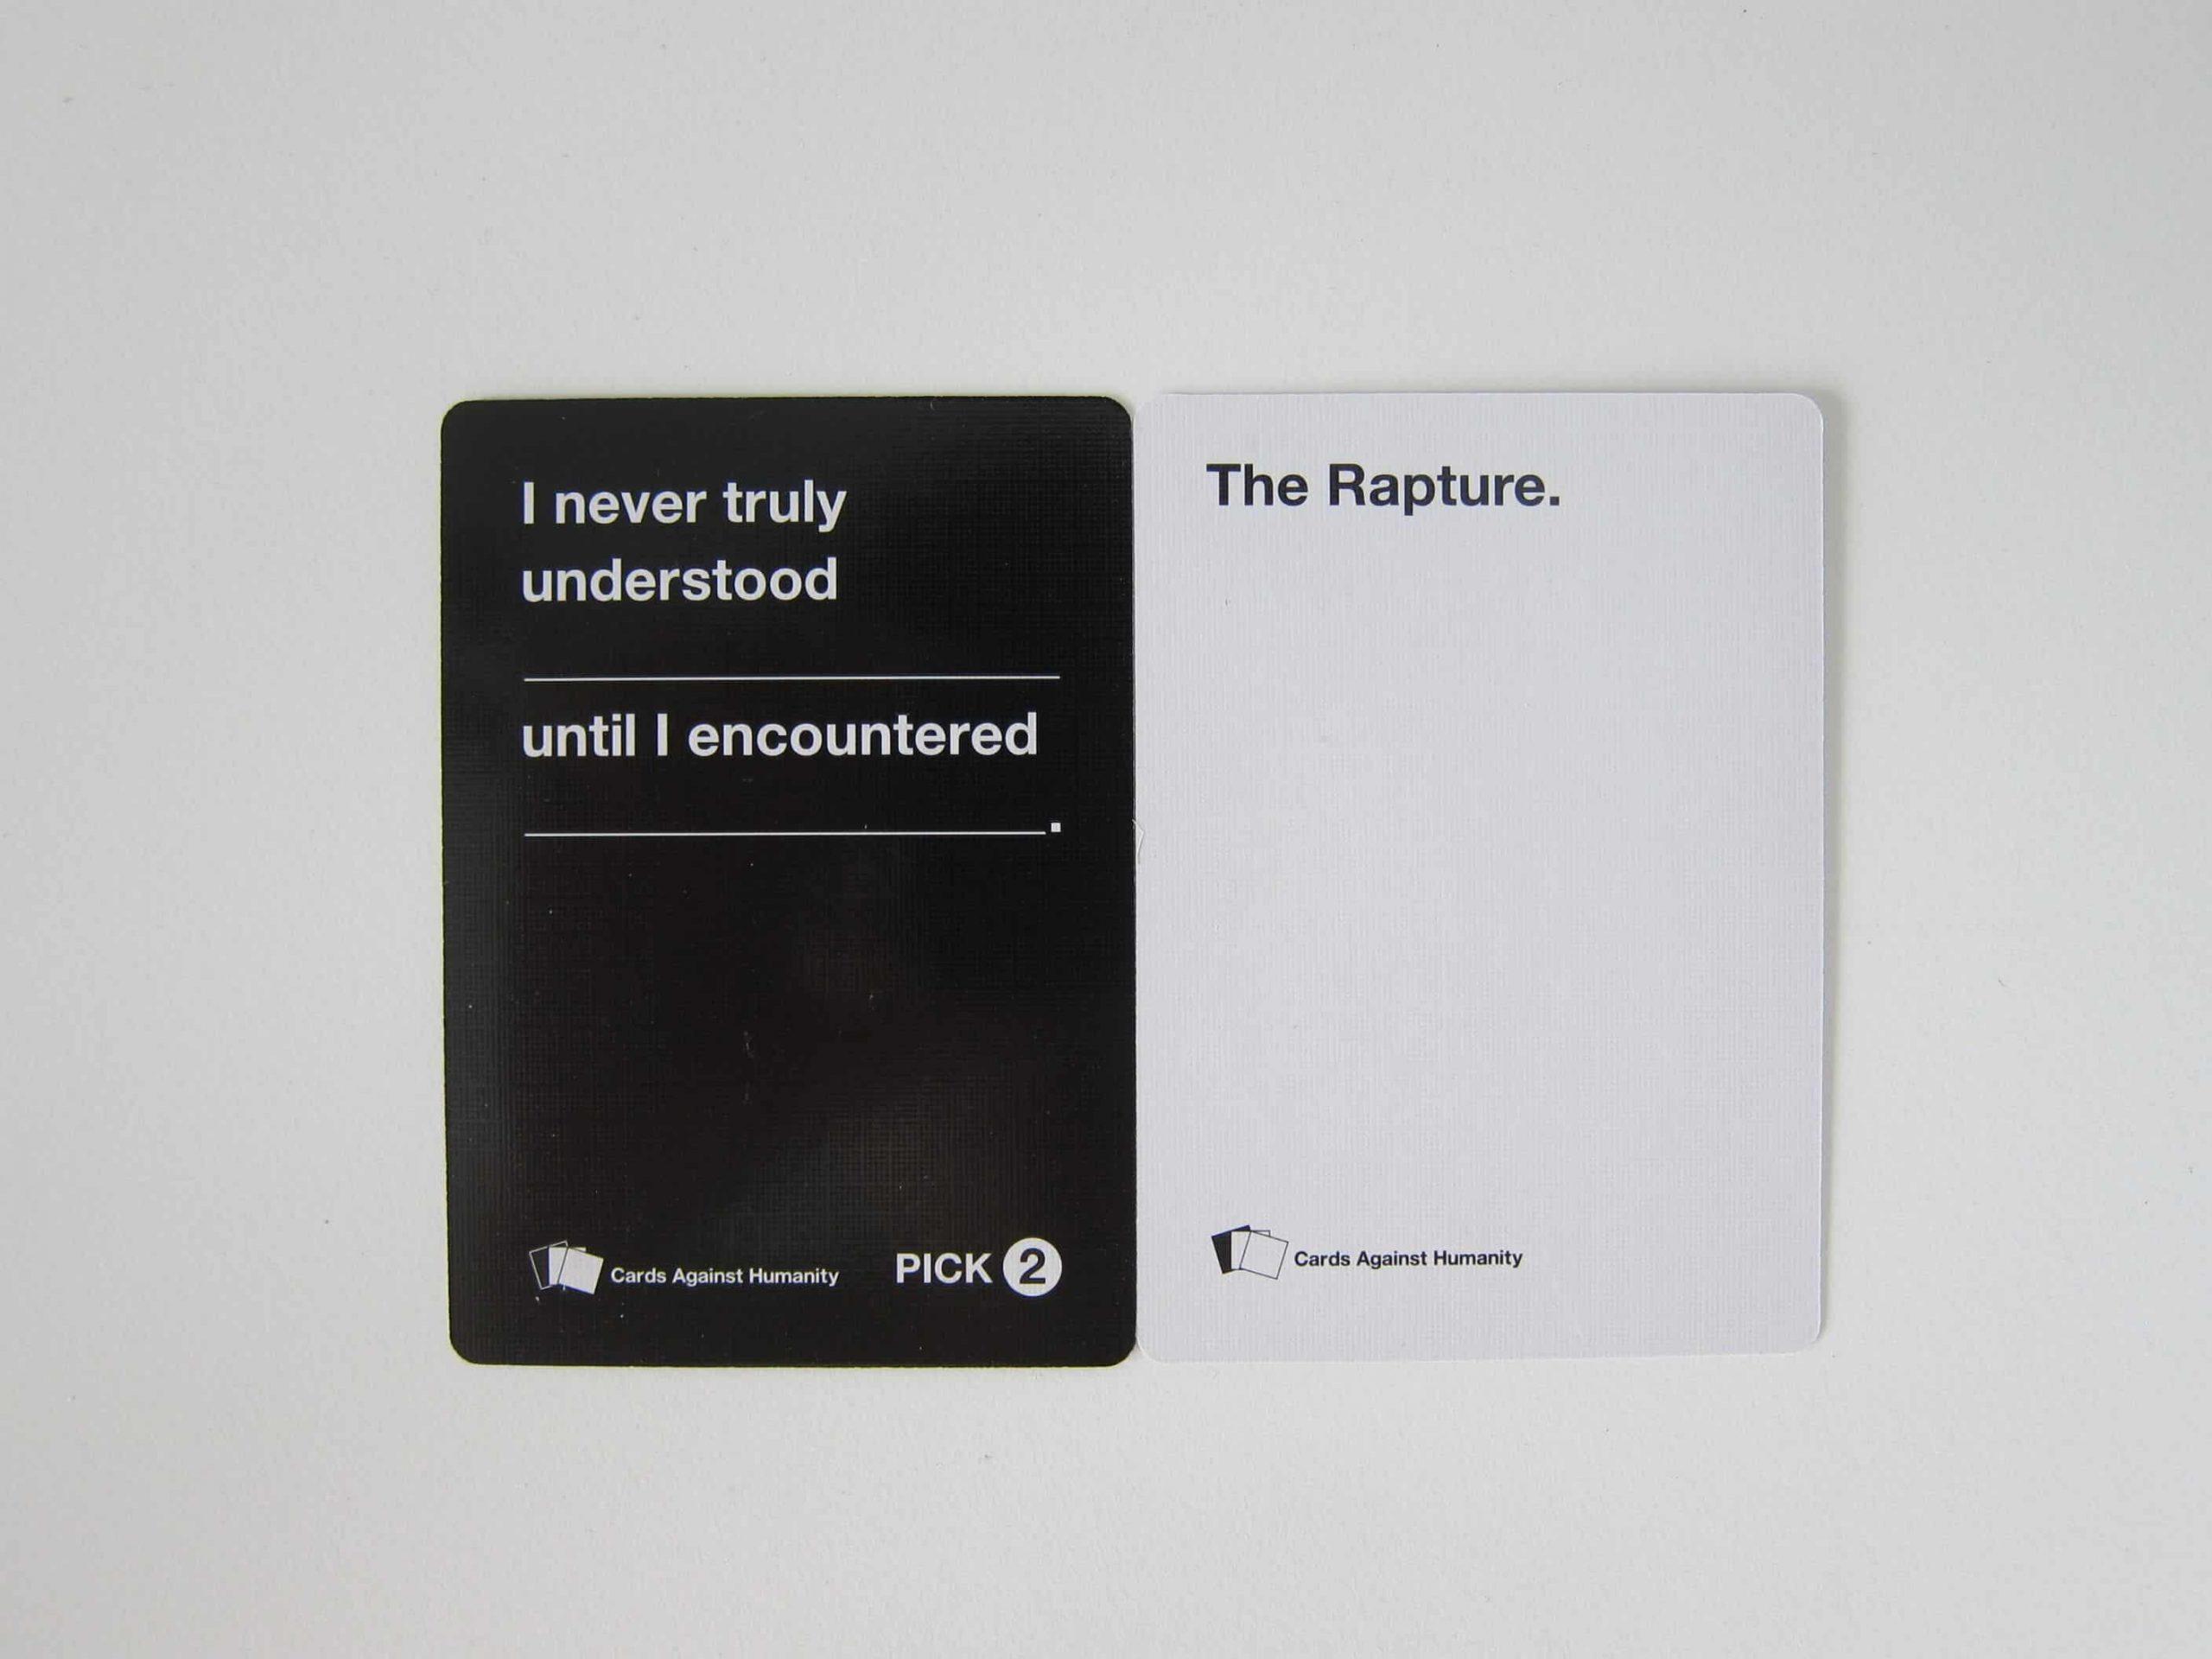 The Rapture Cards Against Humanity